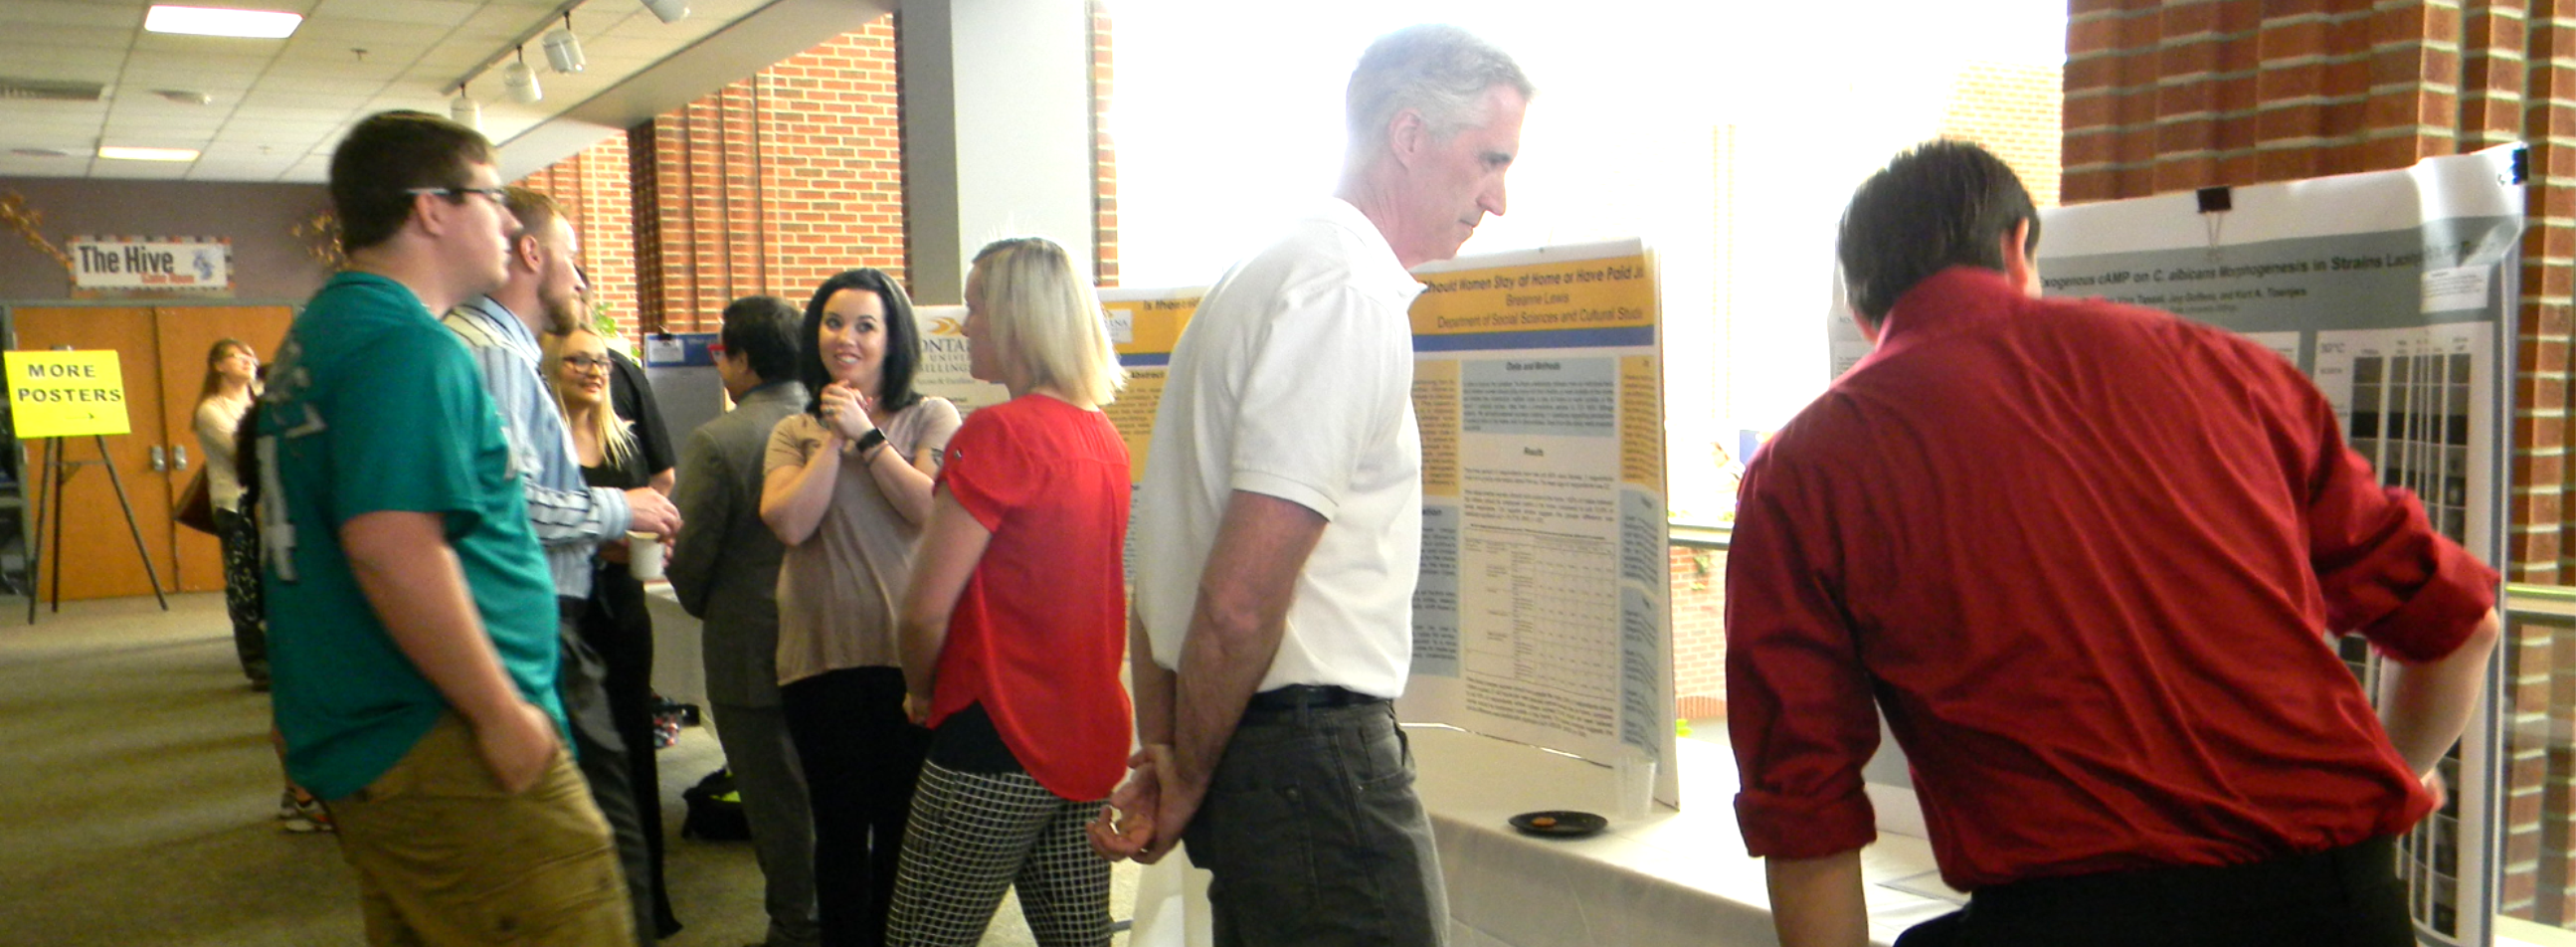 students and community members gathered to discuss research projects